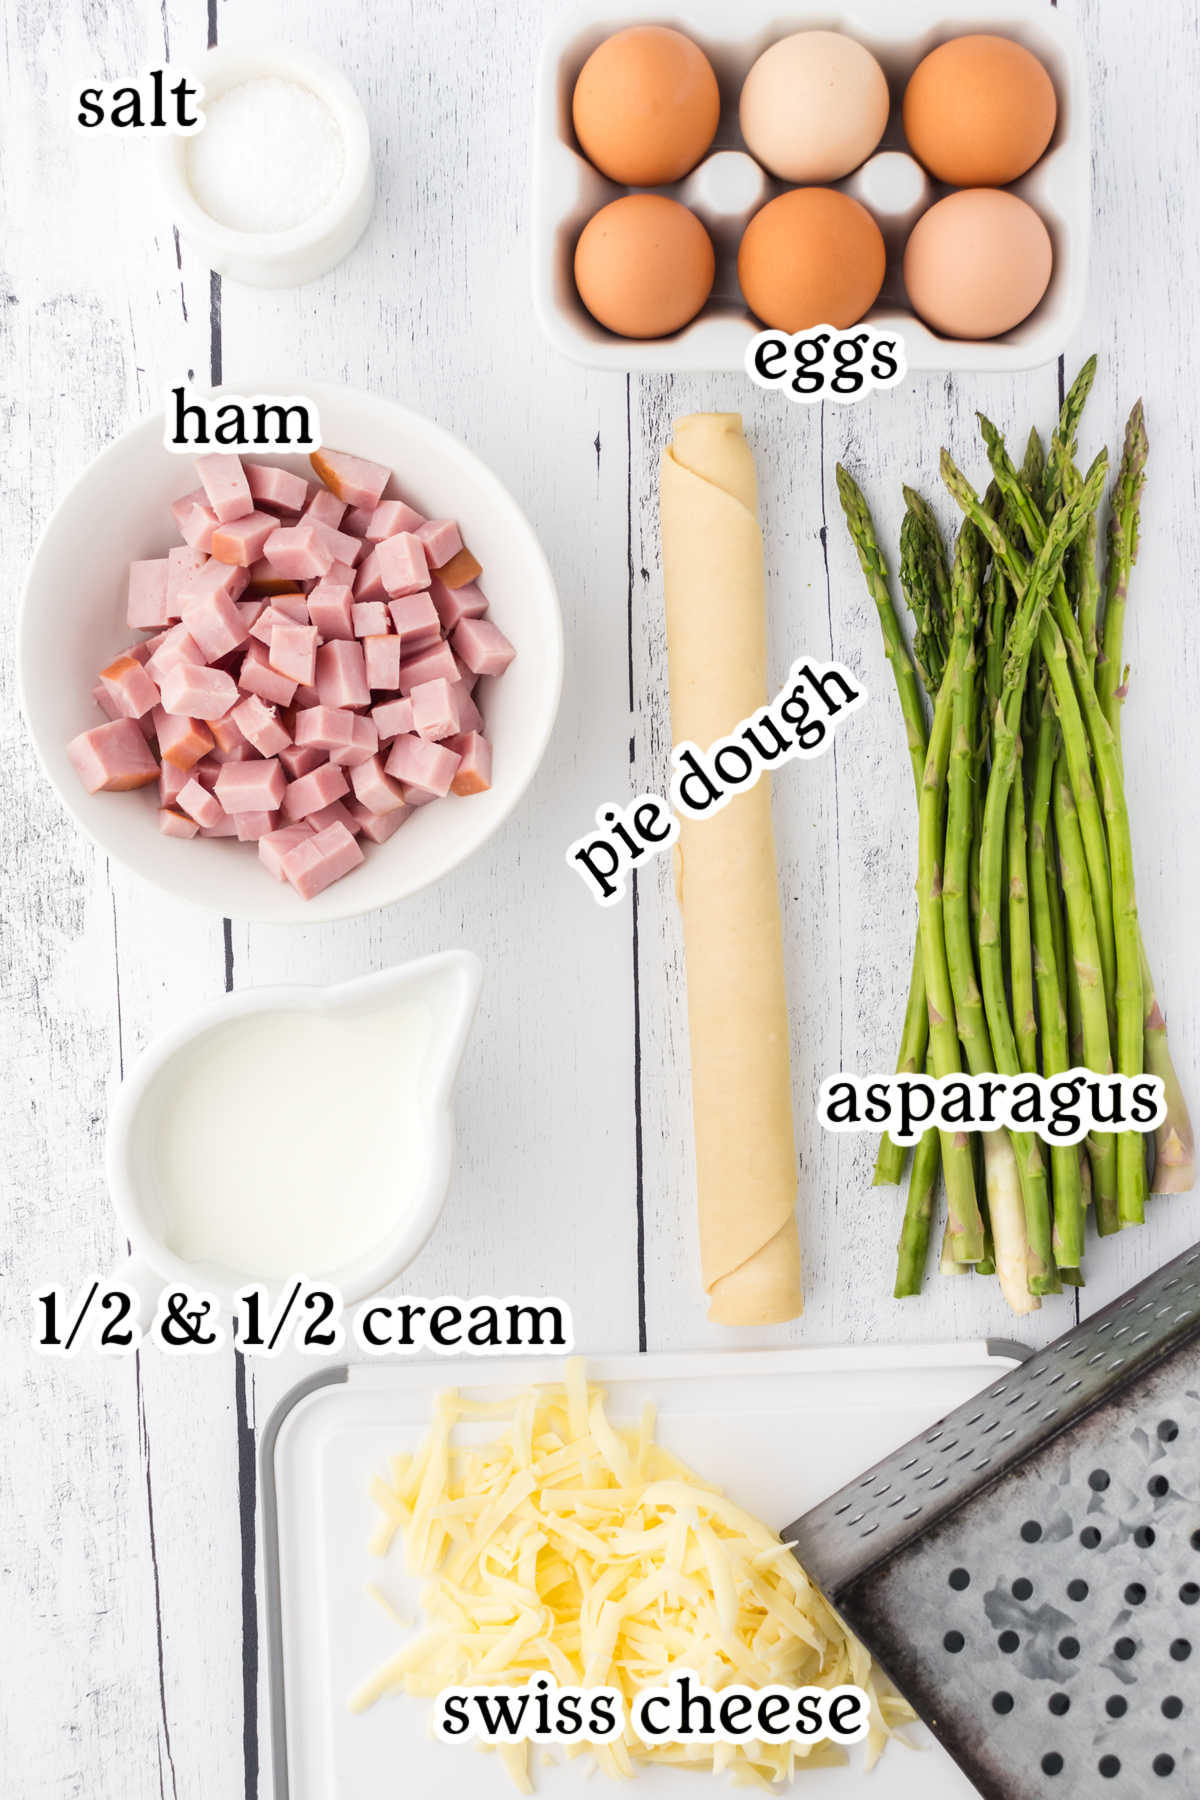 Labeled ingredients for ham and asparagus quiche.